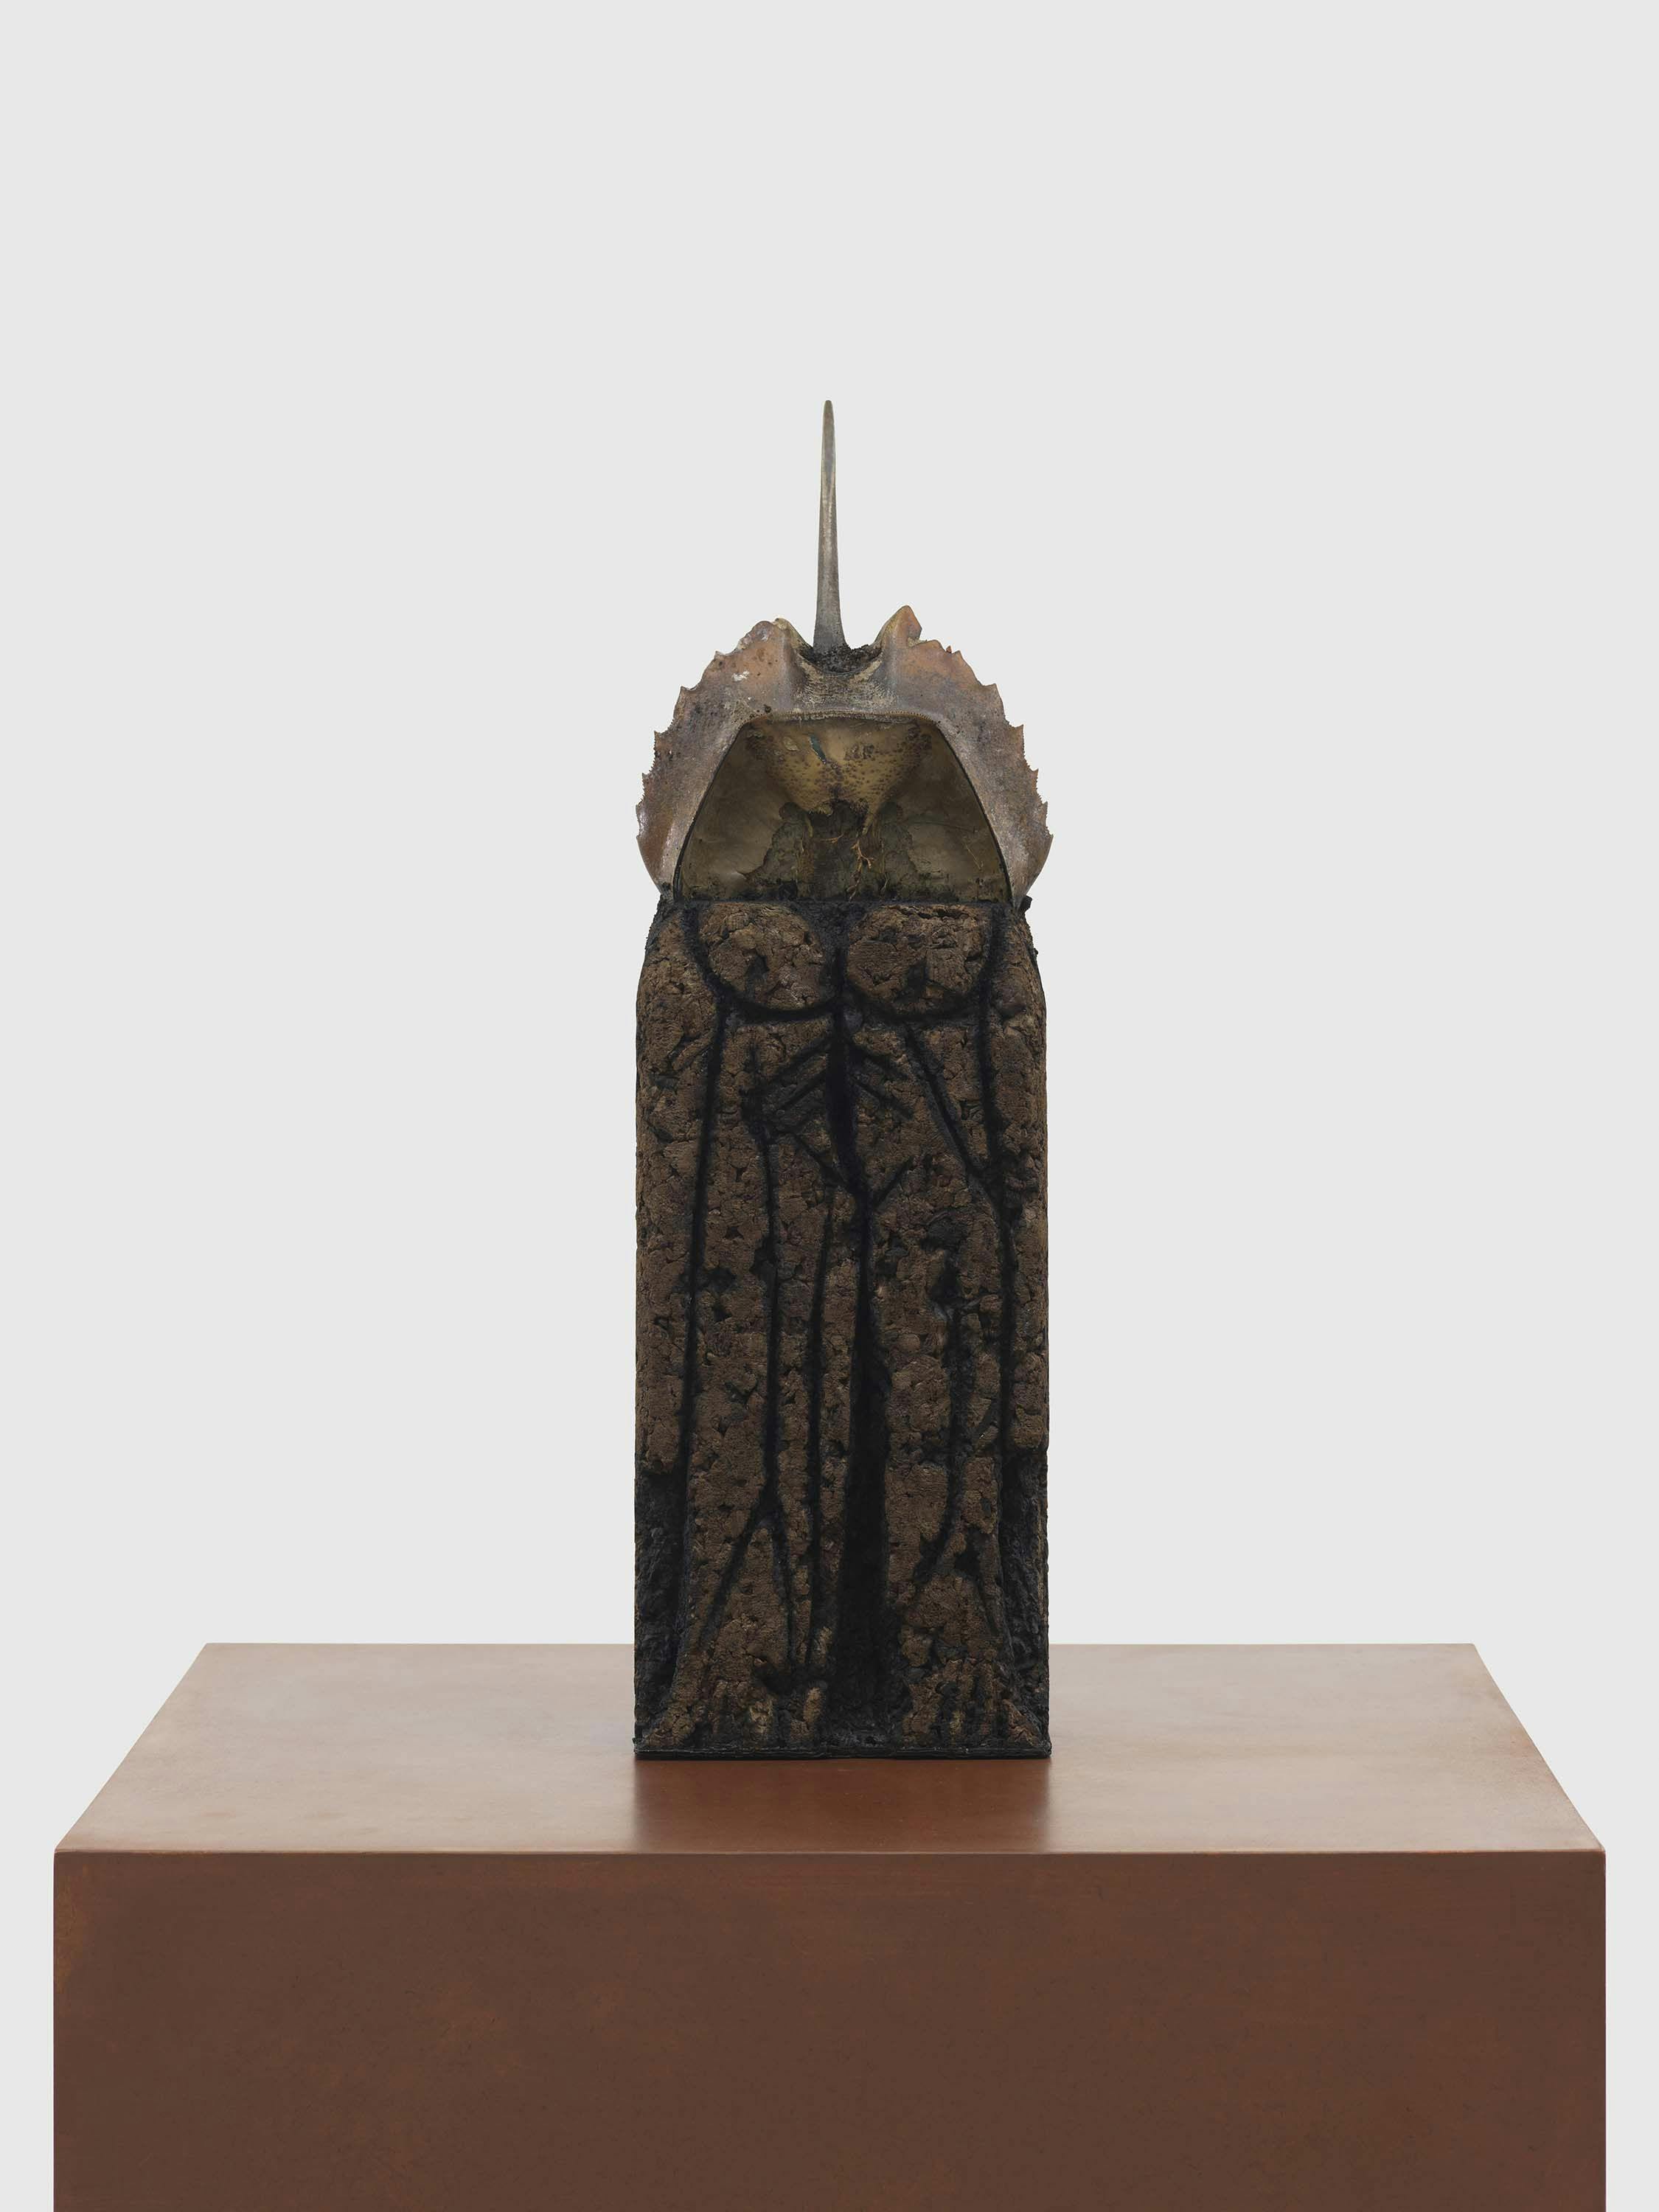 A sculpture by Huma Bhabha, titled Pathfinder, dated 2021.